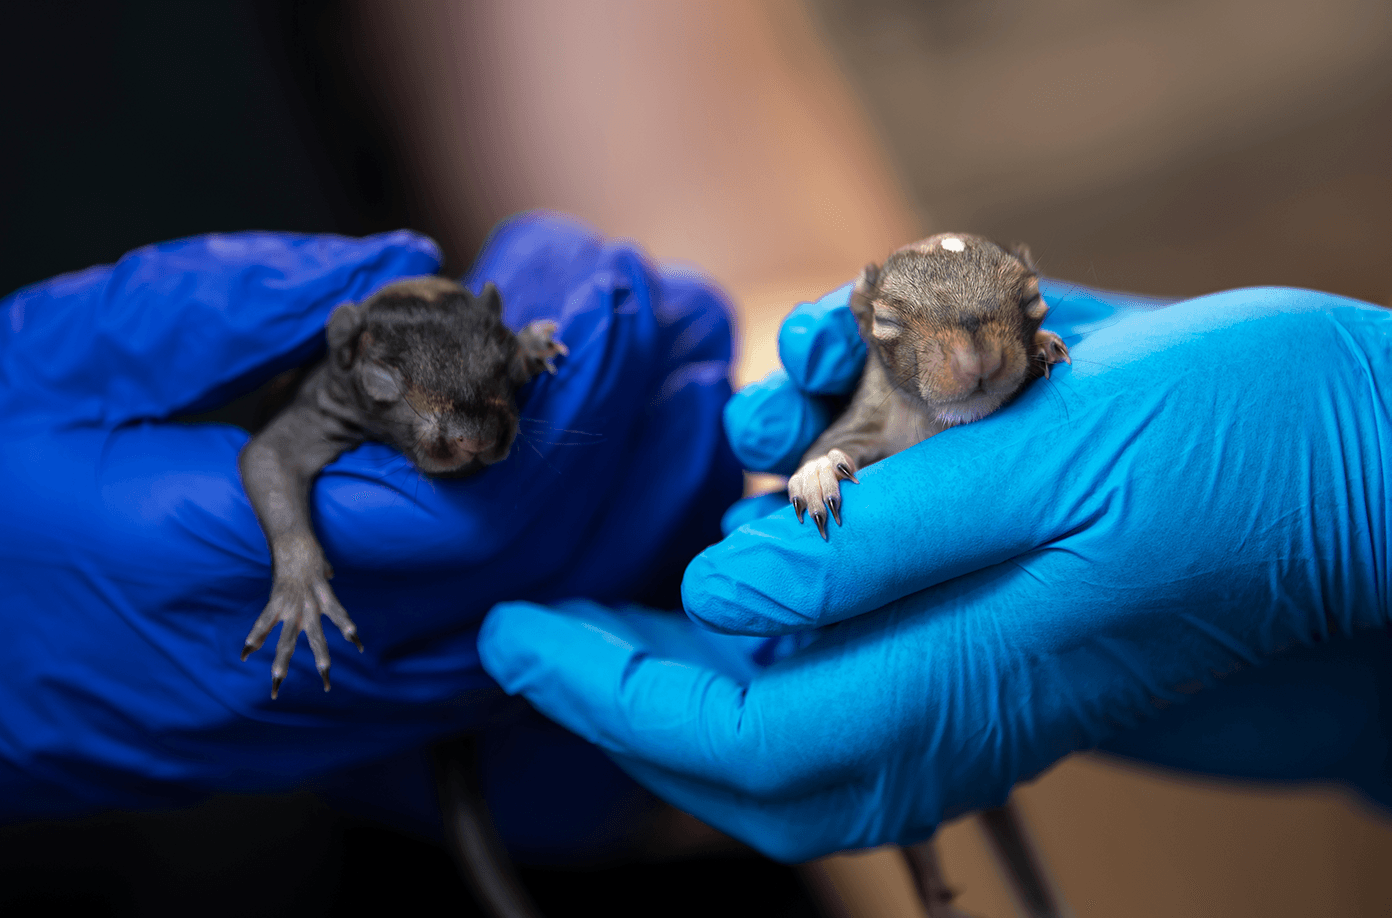 Eyes closed and little claws out, two baby squirrels each rest in a blue-latex-gloved hand.